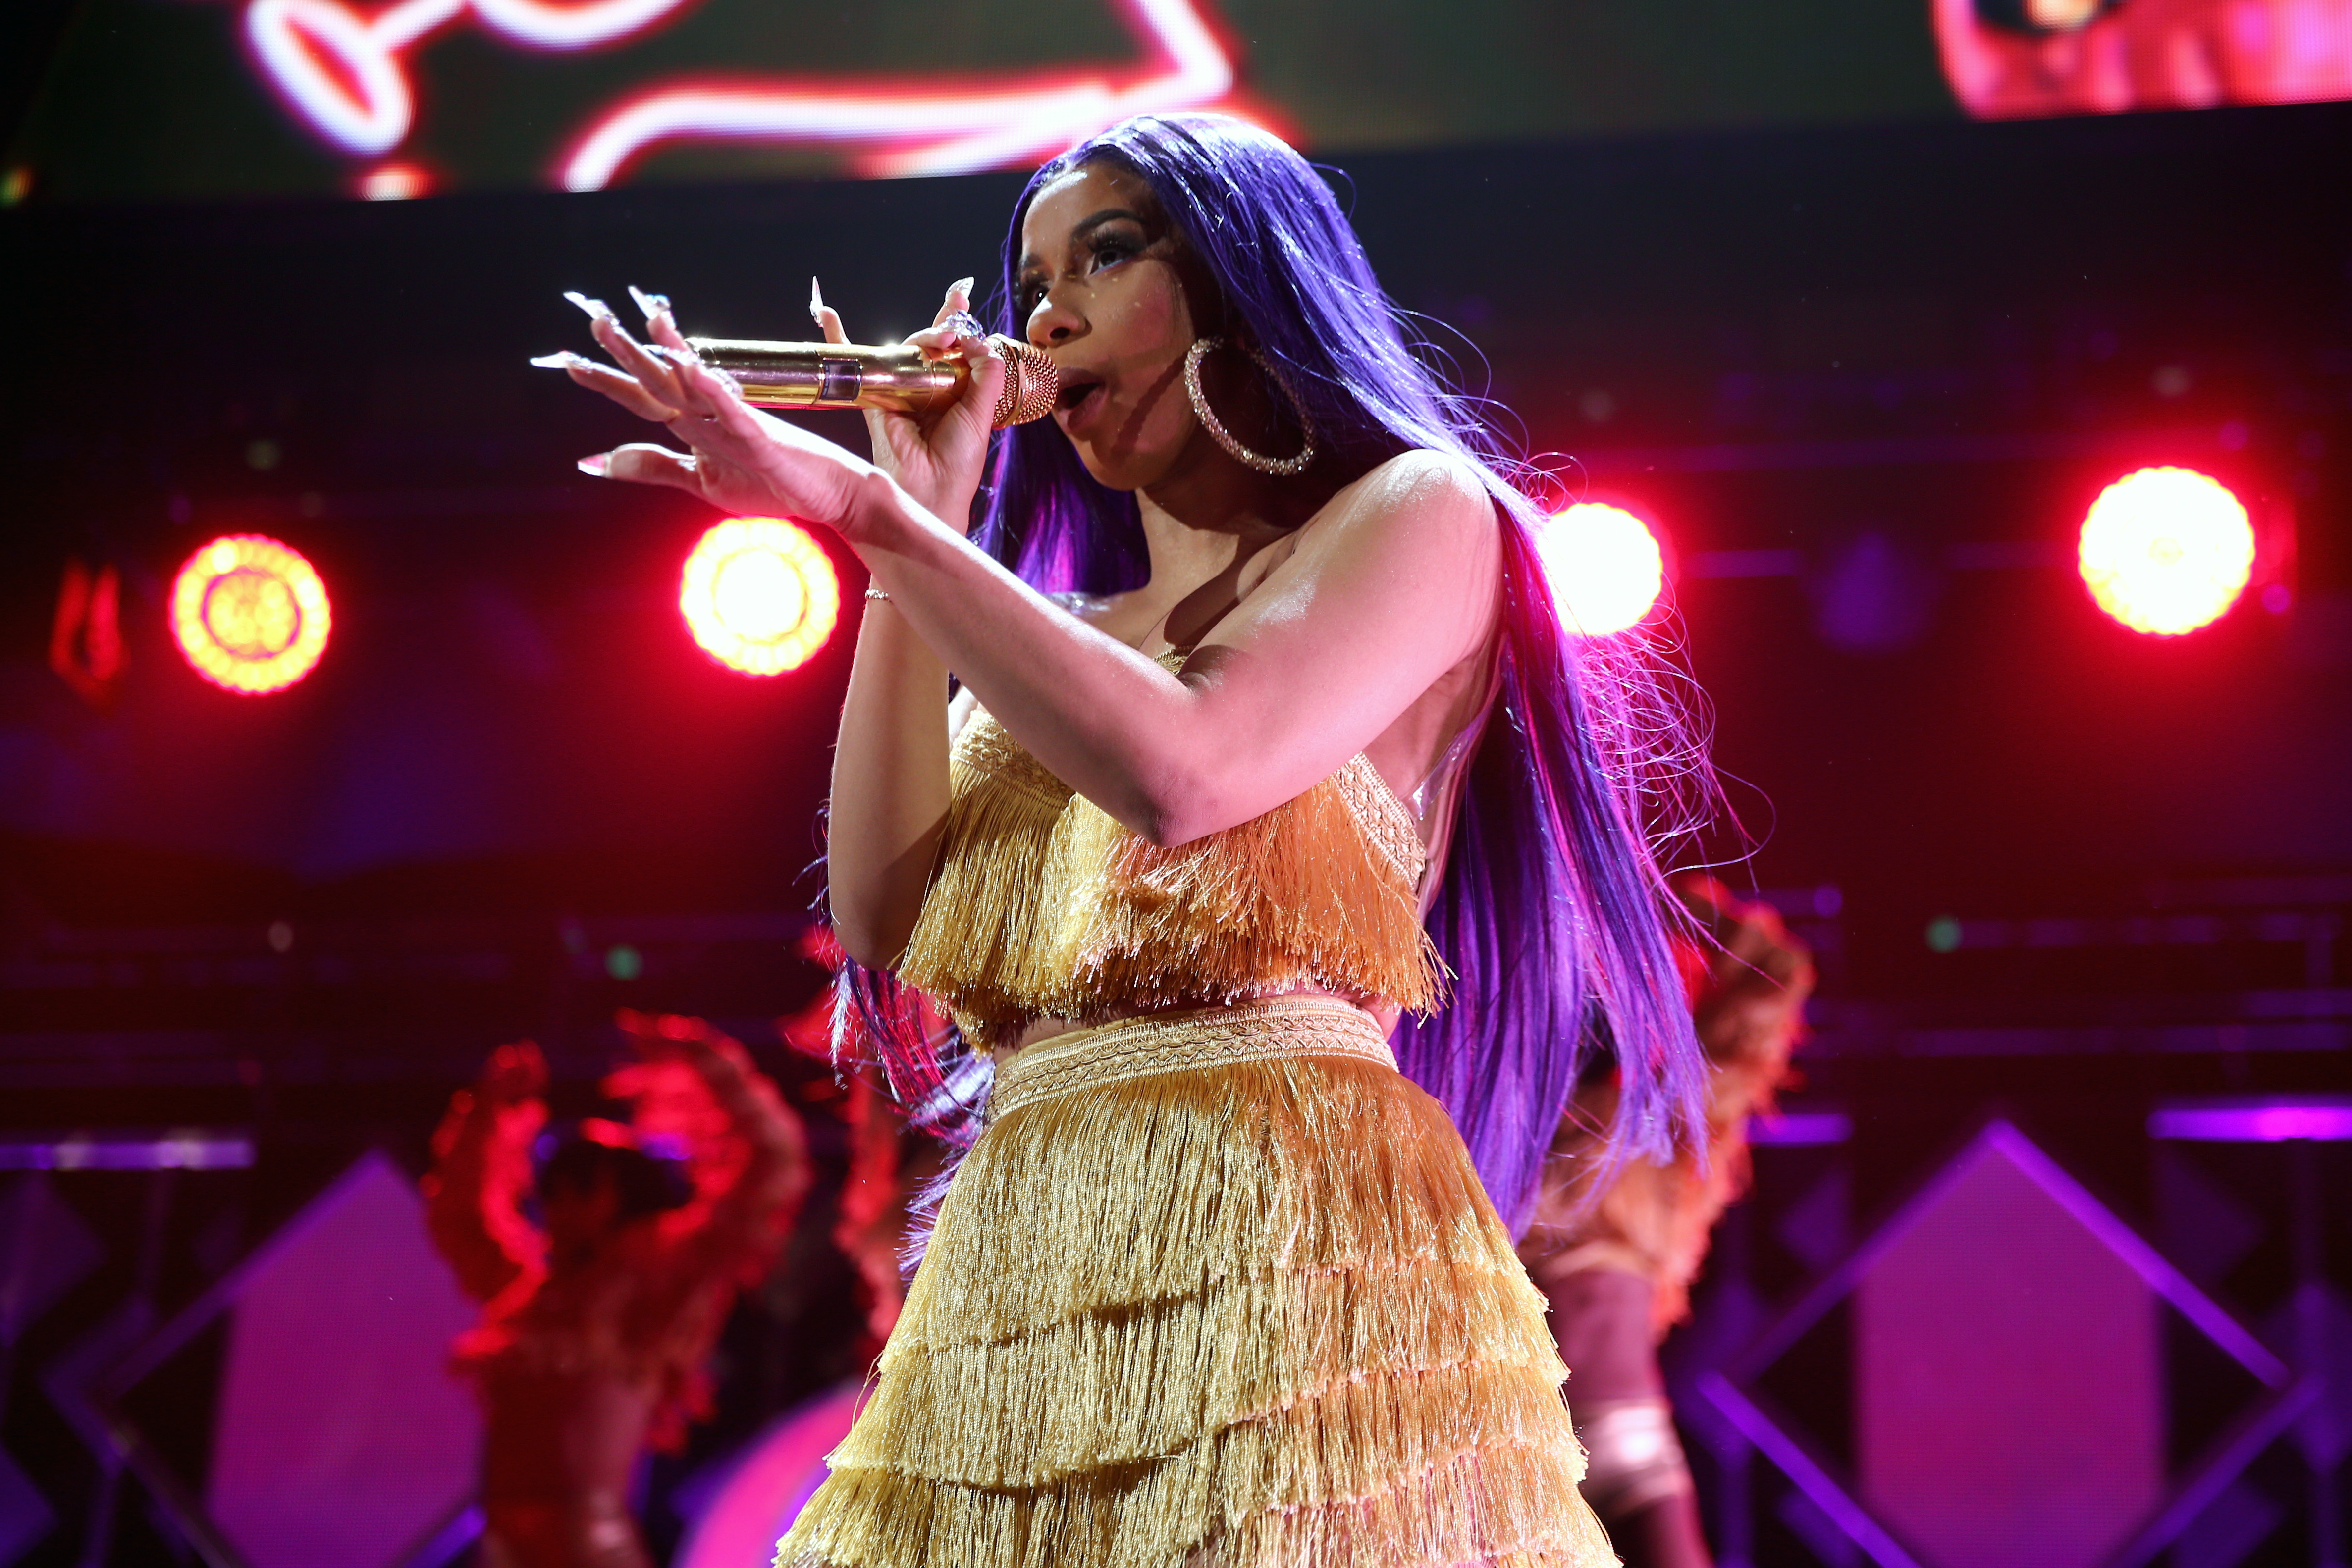 Cardi B performs onstage on Nov. 30, 2018 in Inglewood, California. (Rich Fury—iHeartMedia/Getty Images)